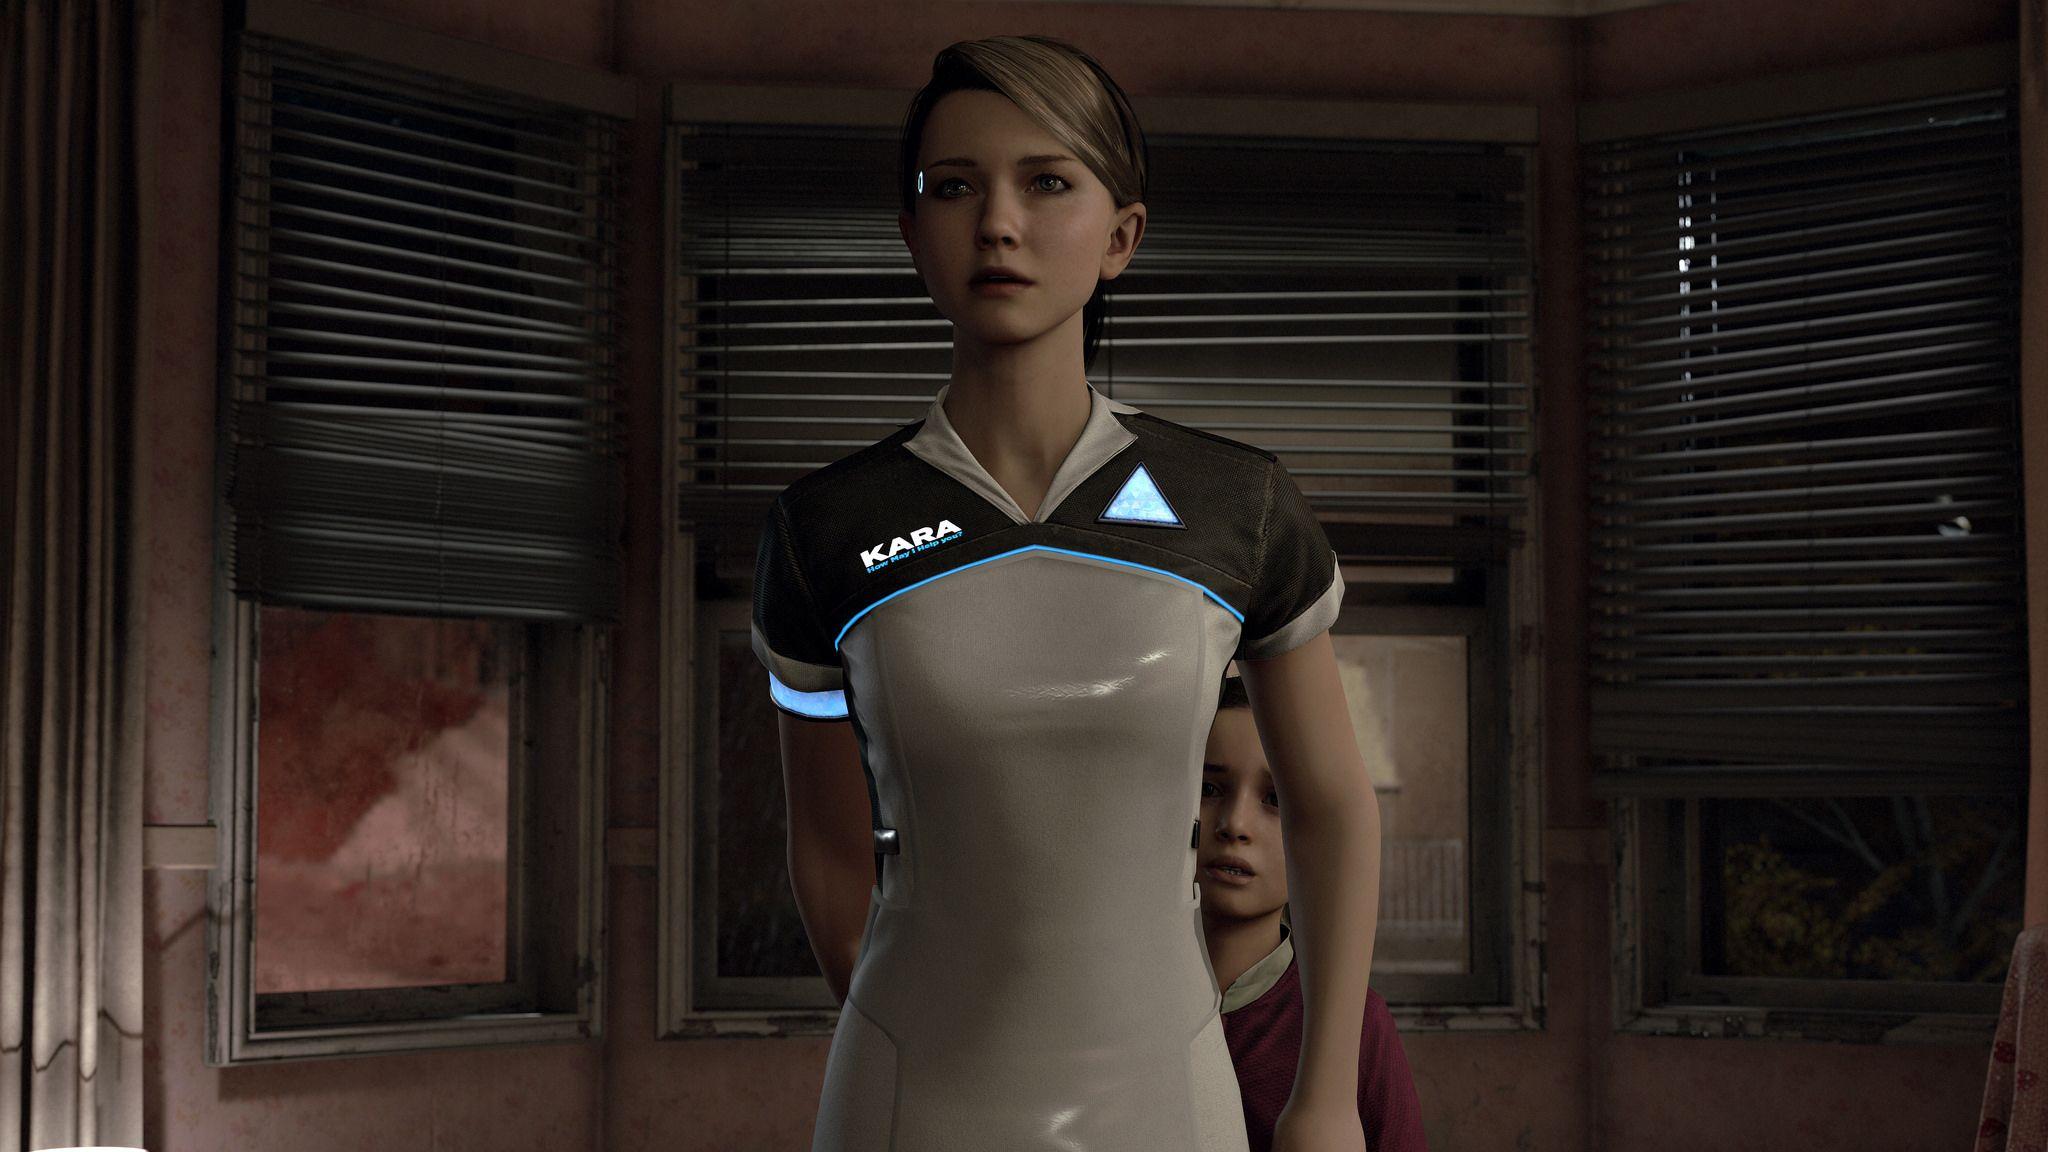 Detroit: Become Human Could Be The Most Relatable Game of 2018